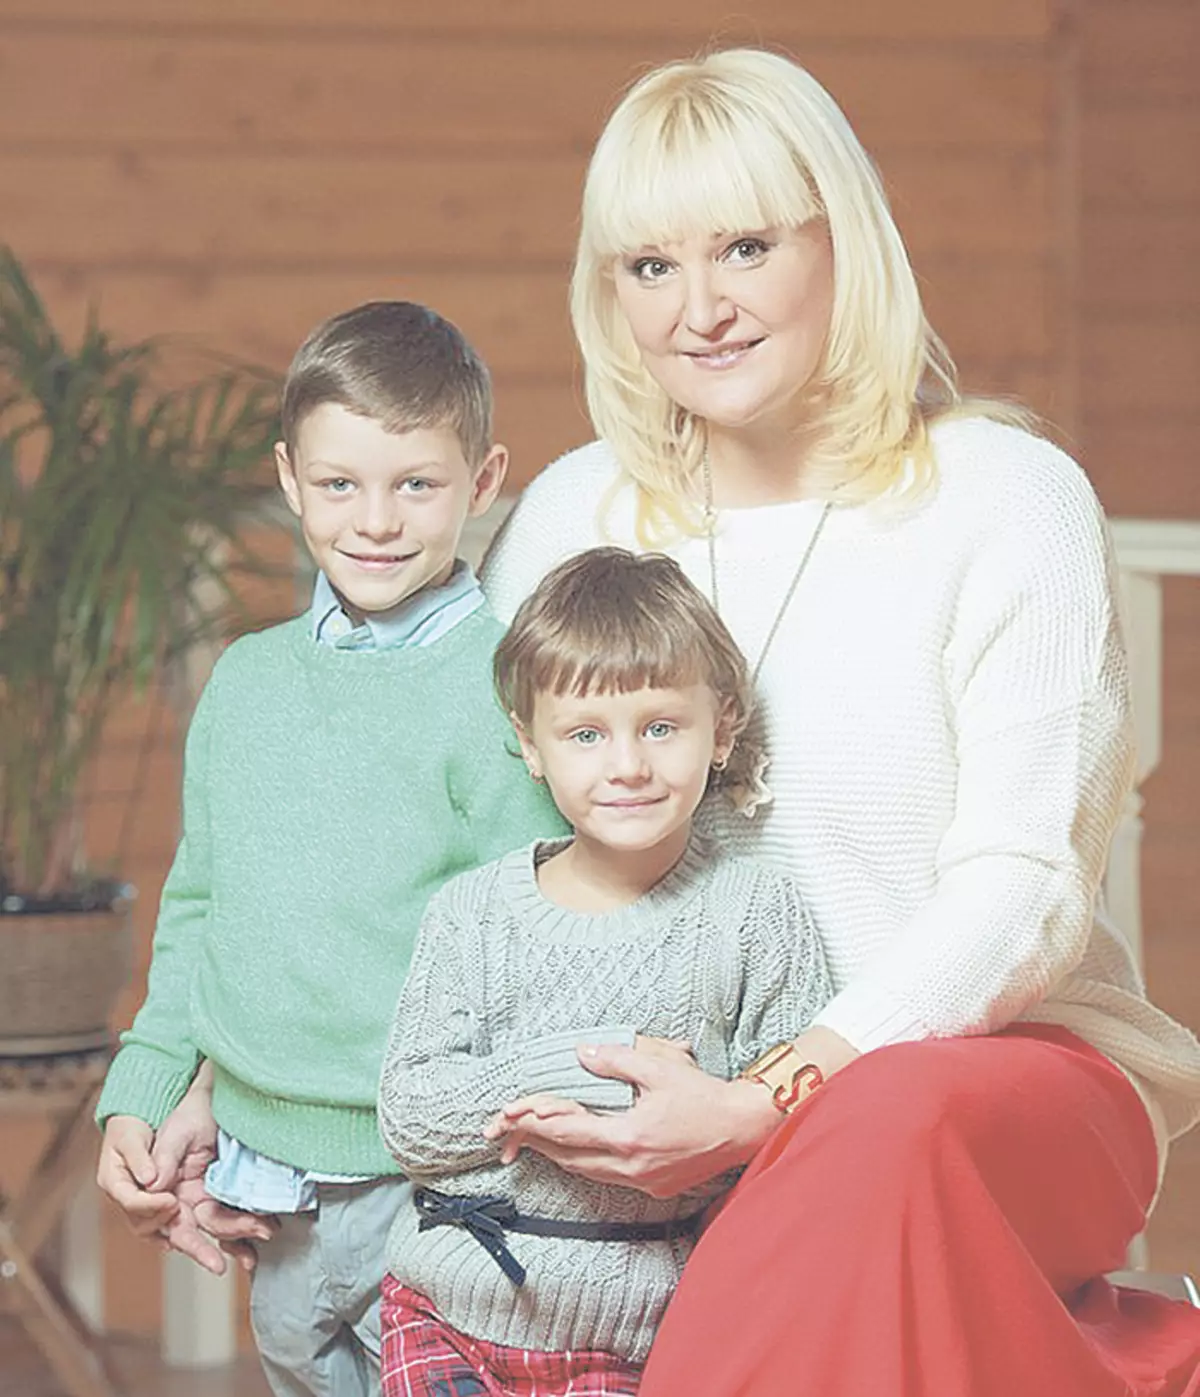 In 2013, Margarita became a foster mom for a three-year-old Valeria and four-year-old Sergey. The singer does everything to ensure that the children get excellent education